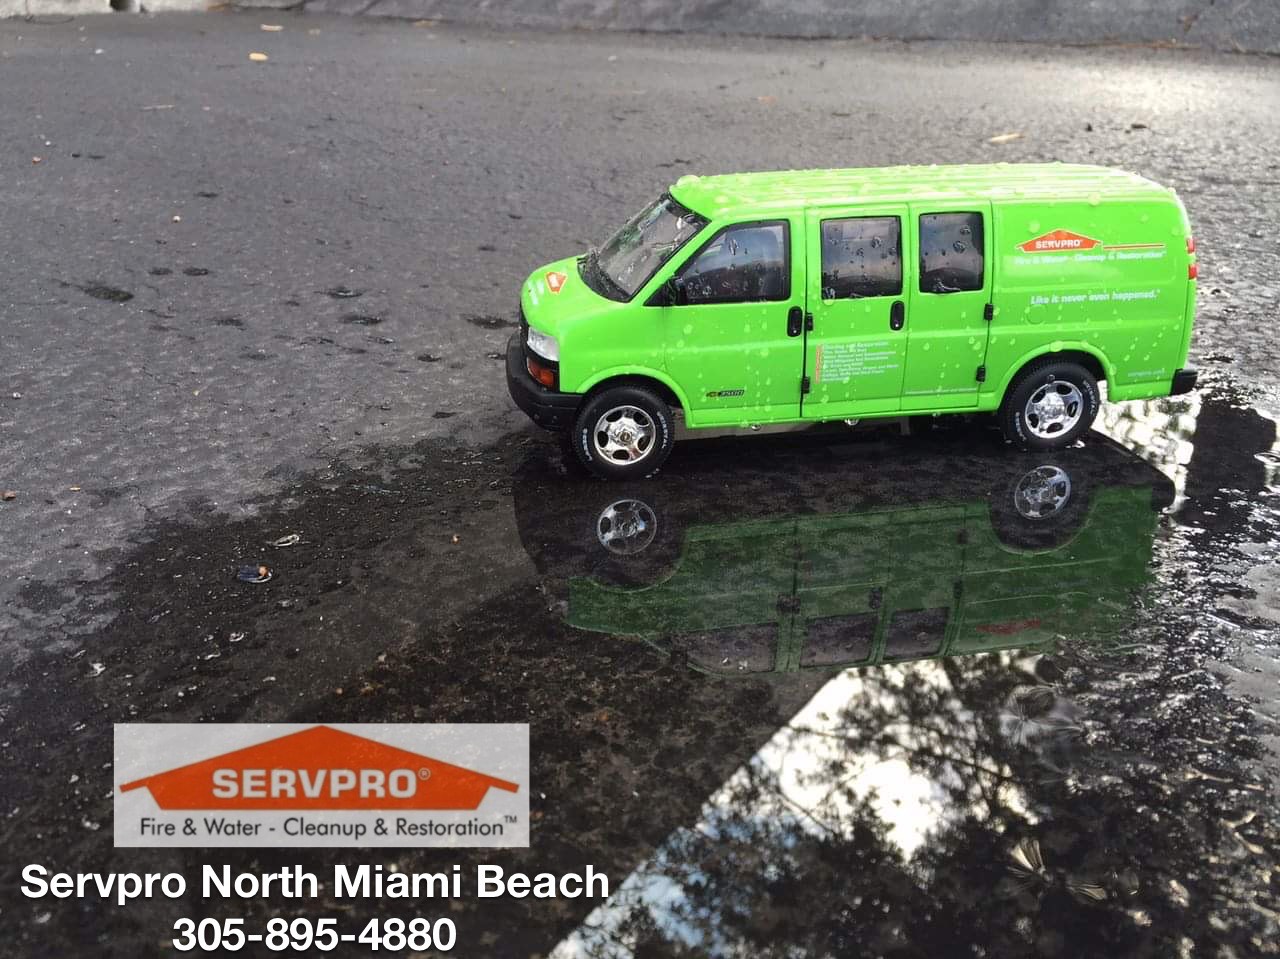 No job is too big or small. When emergencies strike call your North Miami Servpro for all your Mold/Fire/Water needs!